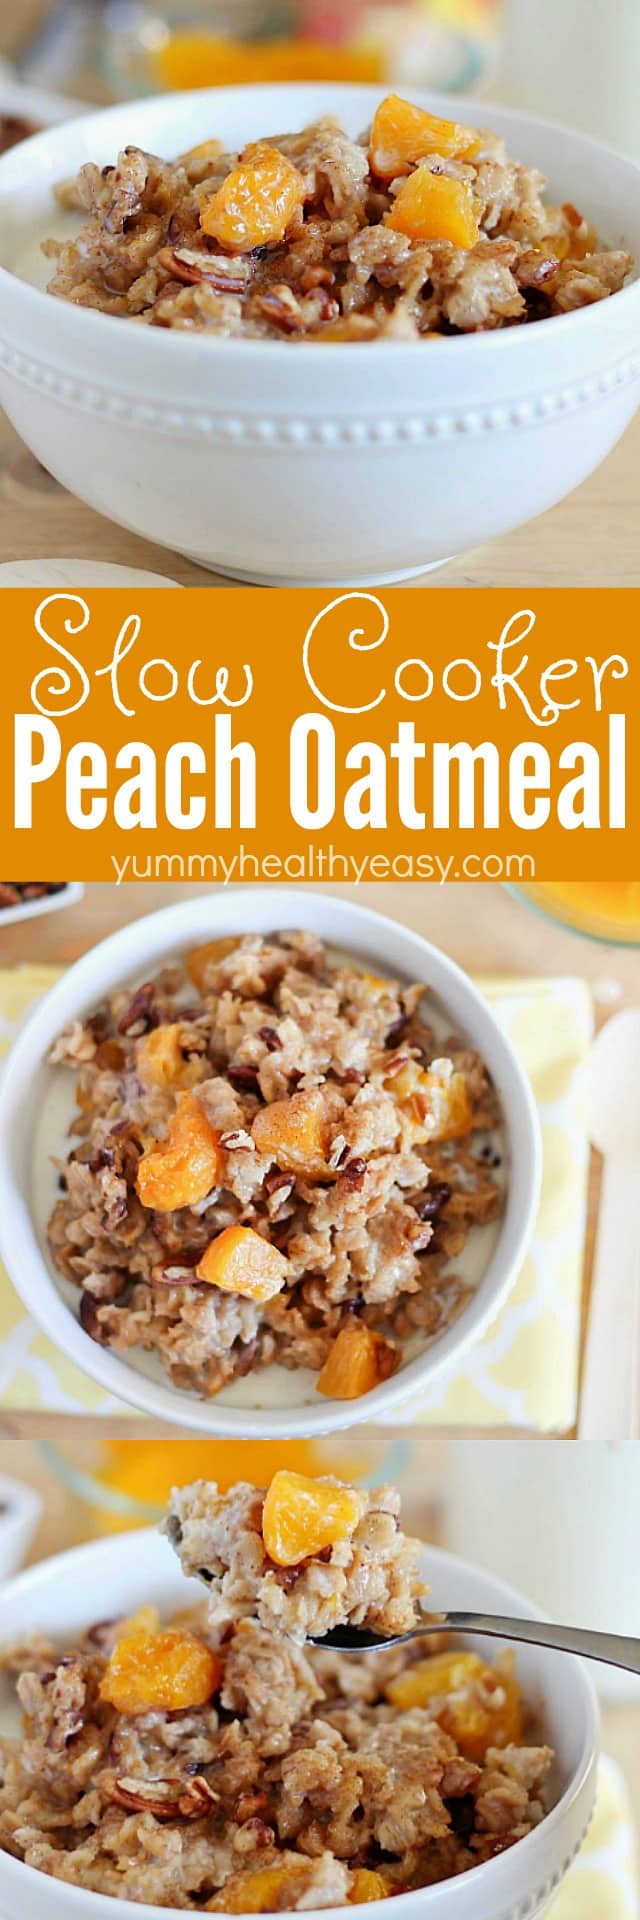 Slow Cooker Peach Oatmeal - healthy oatmeal cooked right in the slow cooker with peaches, pecans and cinnamon. An easy, healthy and delicious breakfast! AD via @jennikolaus